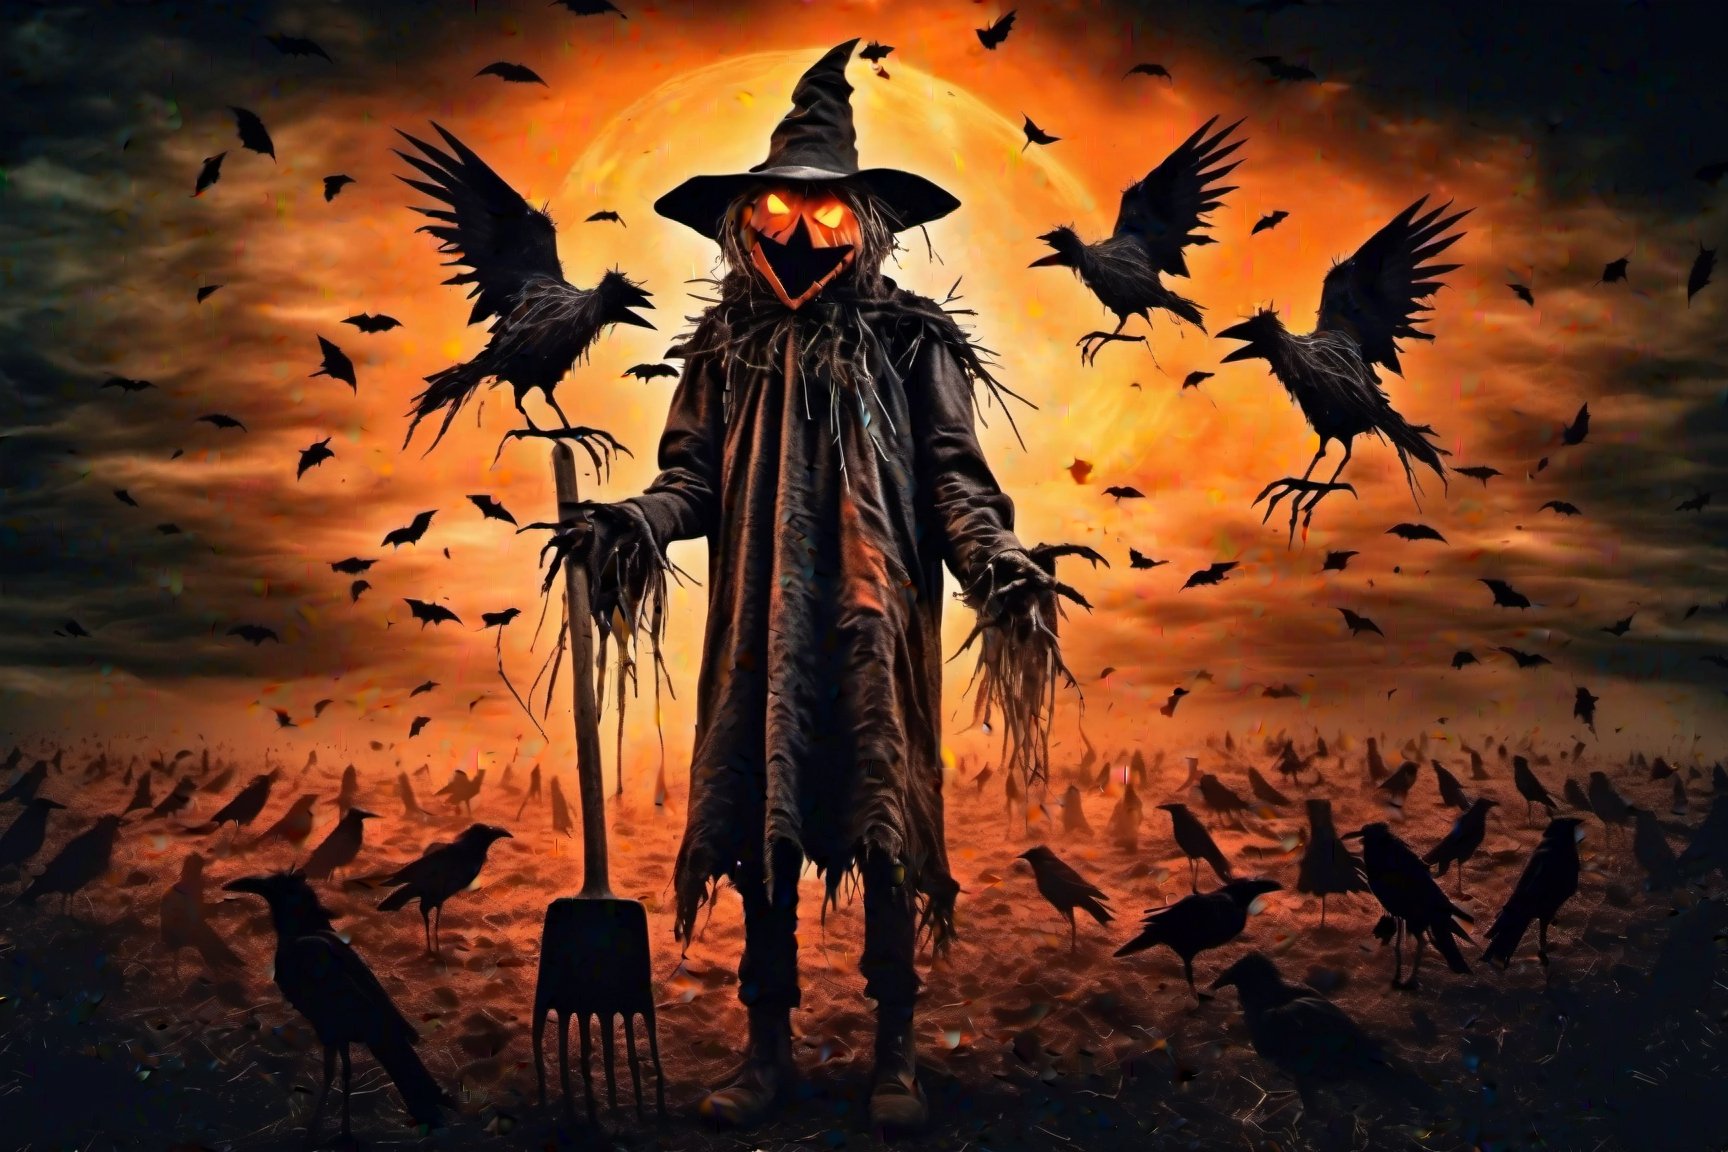 creepy full body scarecrow realistic with hatchet in hand at night foreboding background HD, flock of flying crows, corpses coming out of the ground, tenebrism, strange, multi tonal orange and black gradient tumultuous sky, dark core, moderately controlled chaos, ghost core, Nicolas Samori